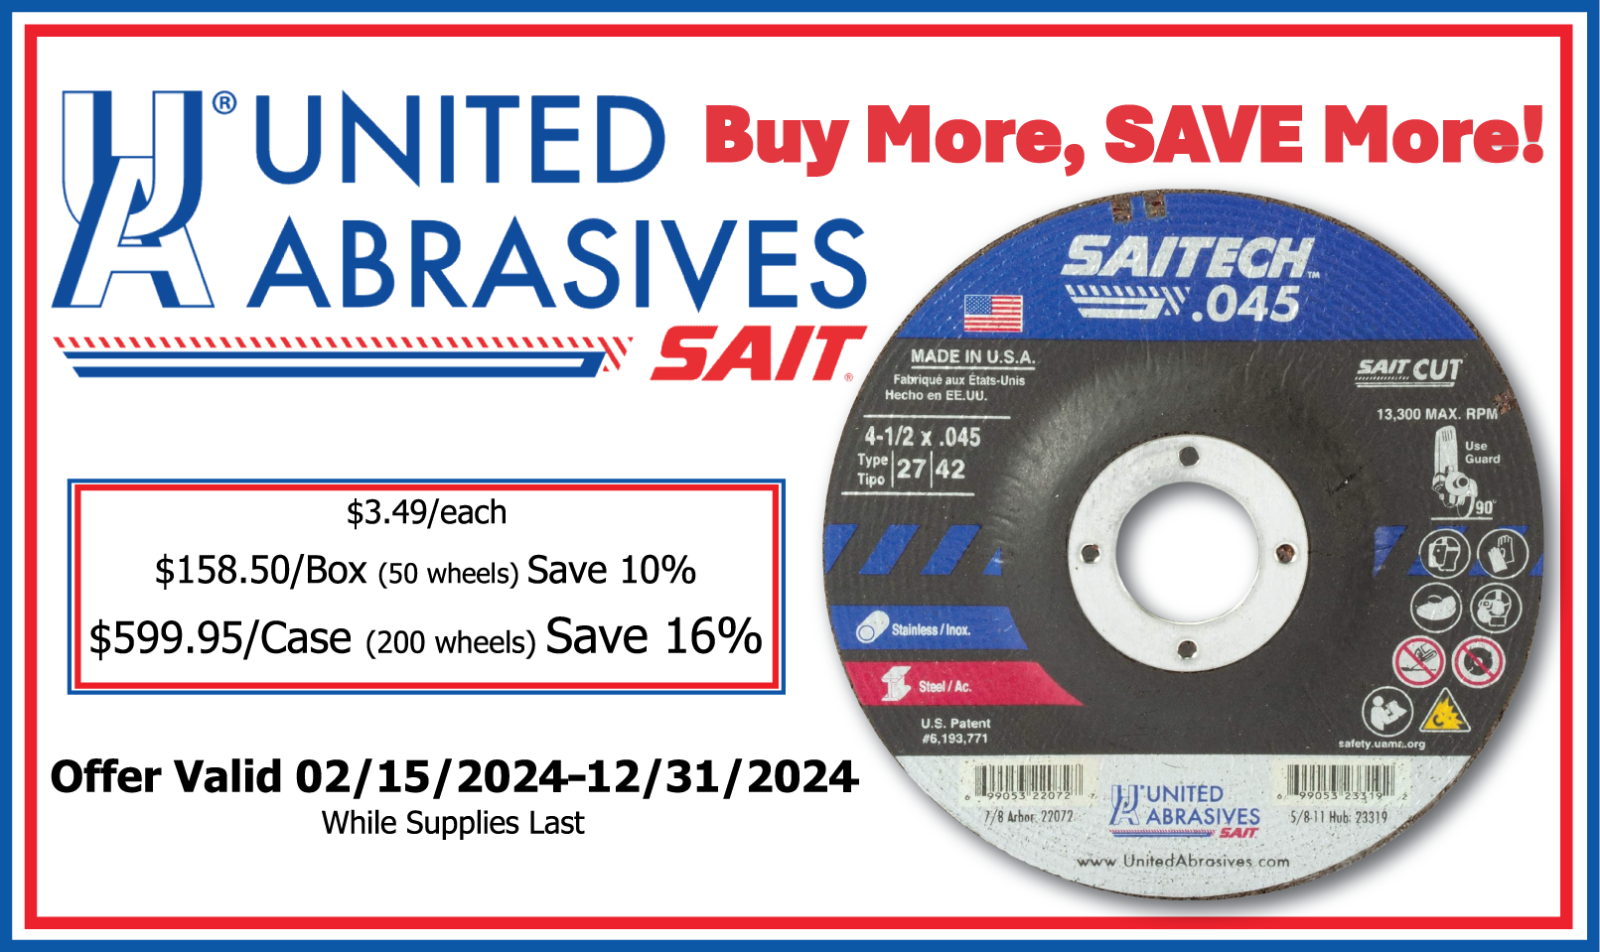 United Abrasives: Buy More, Save More